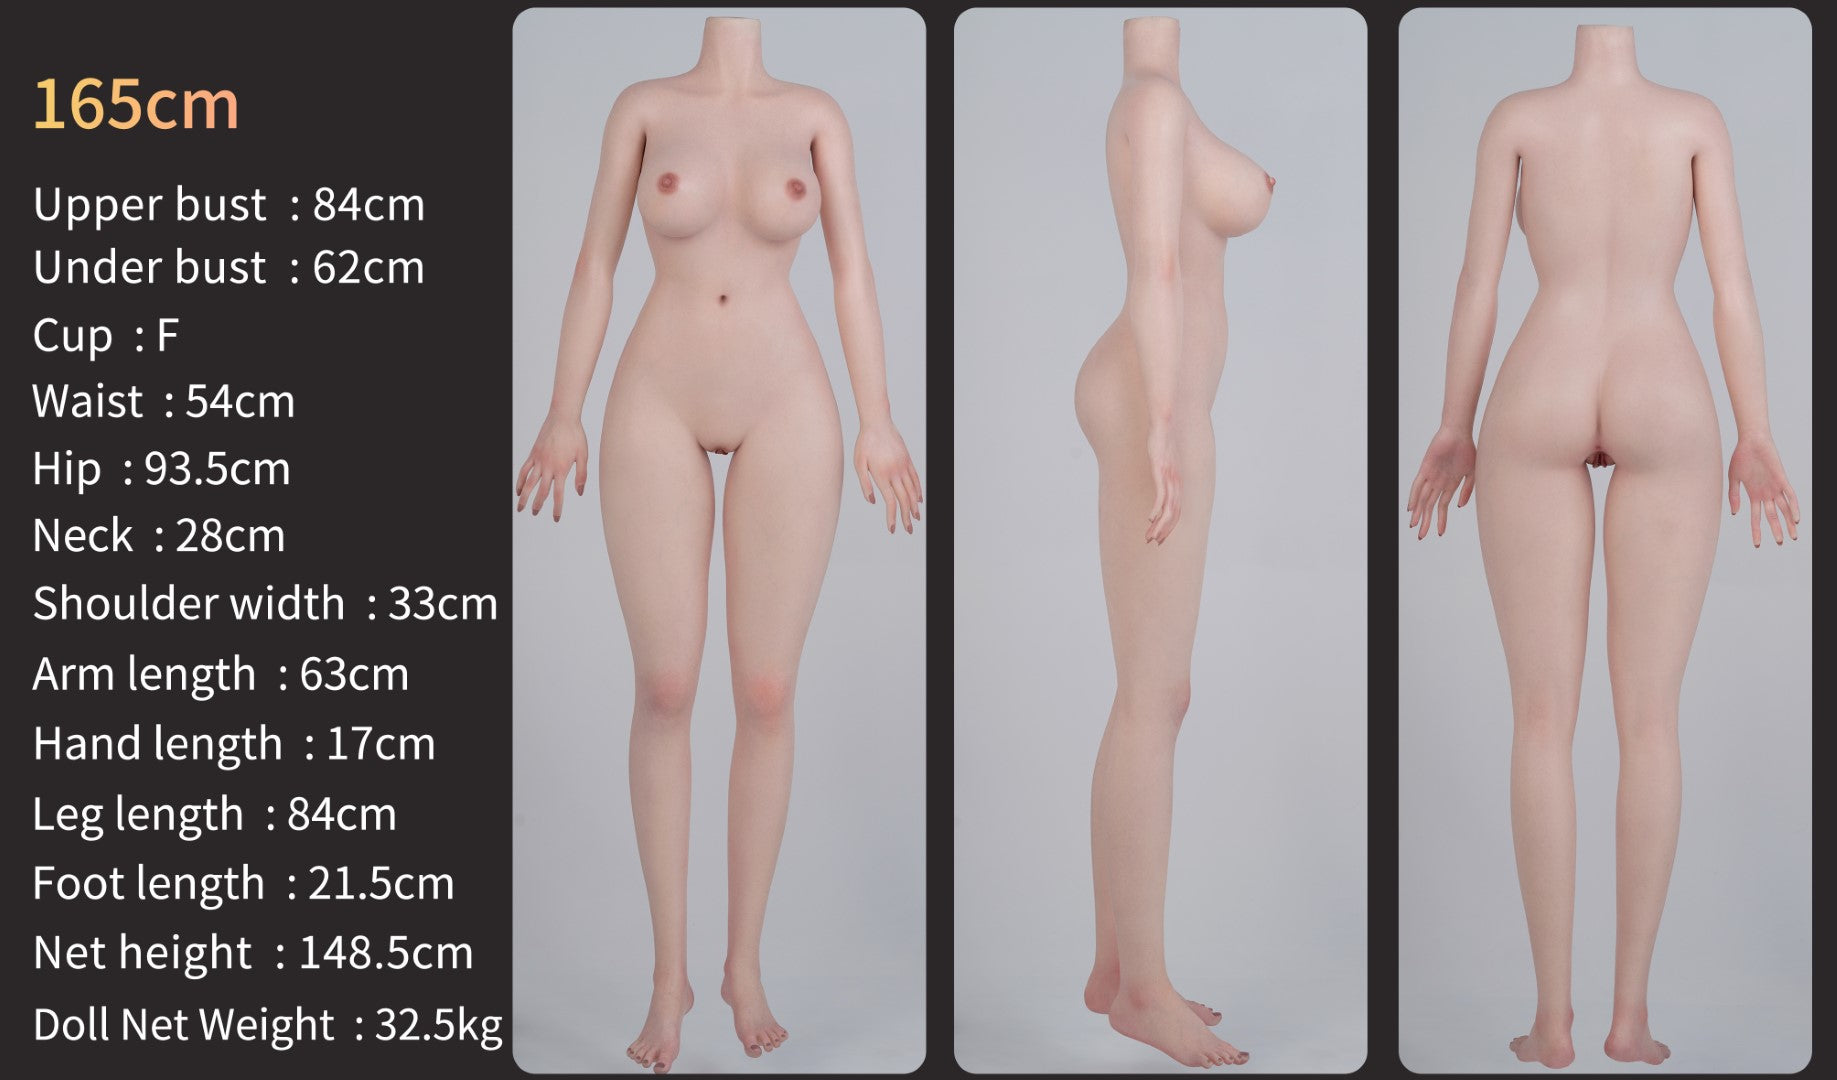 Zelex Sex Doll 165 cm - Silicone Real Doll. Docklandet - Up to 60% sale on the highest quality sex dolls. Buy yours sex doll today, express delivery to the entire Nordic region and also pickup in Borlänge. Sex dolls also called Real Dolls. Sweden's largest selection and best prices with thousands of satisfied customers!